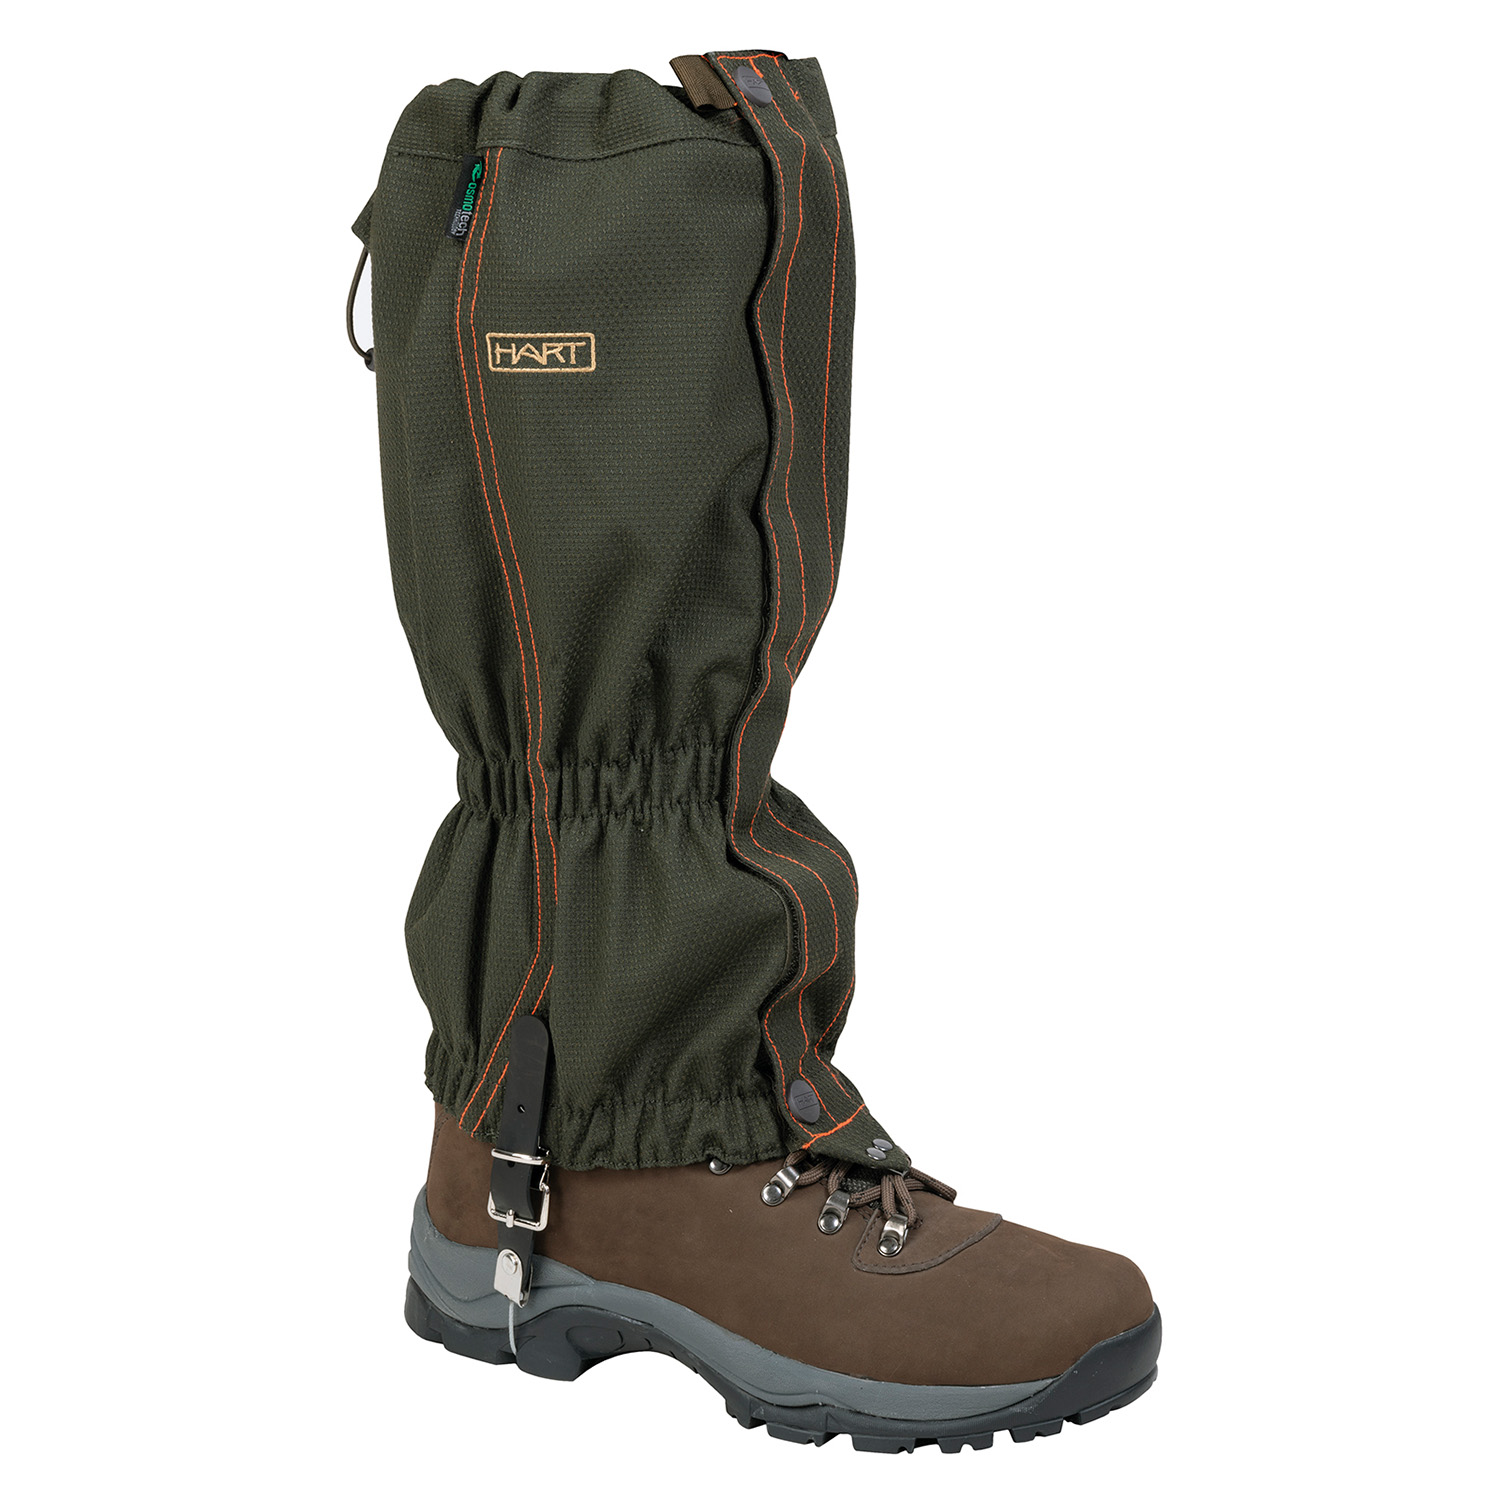 Hart Gaiters Airstrong-G